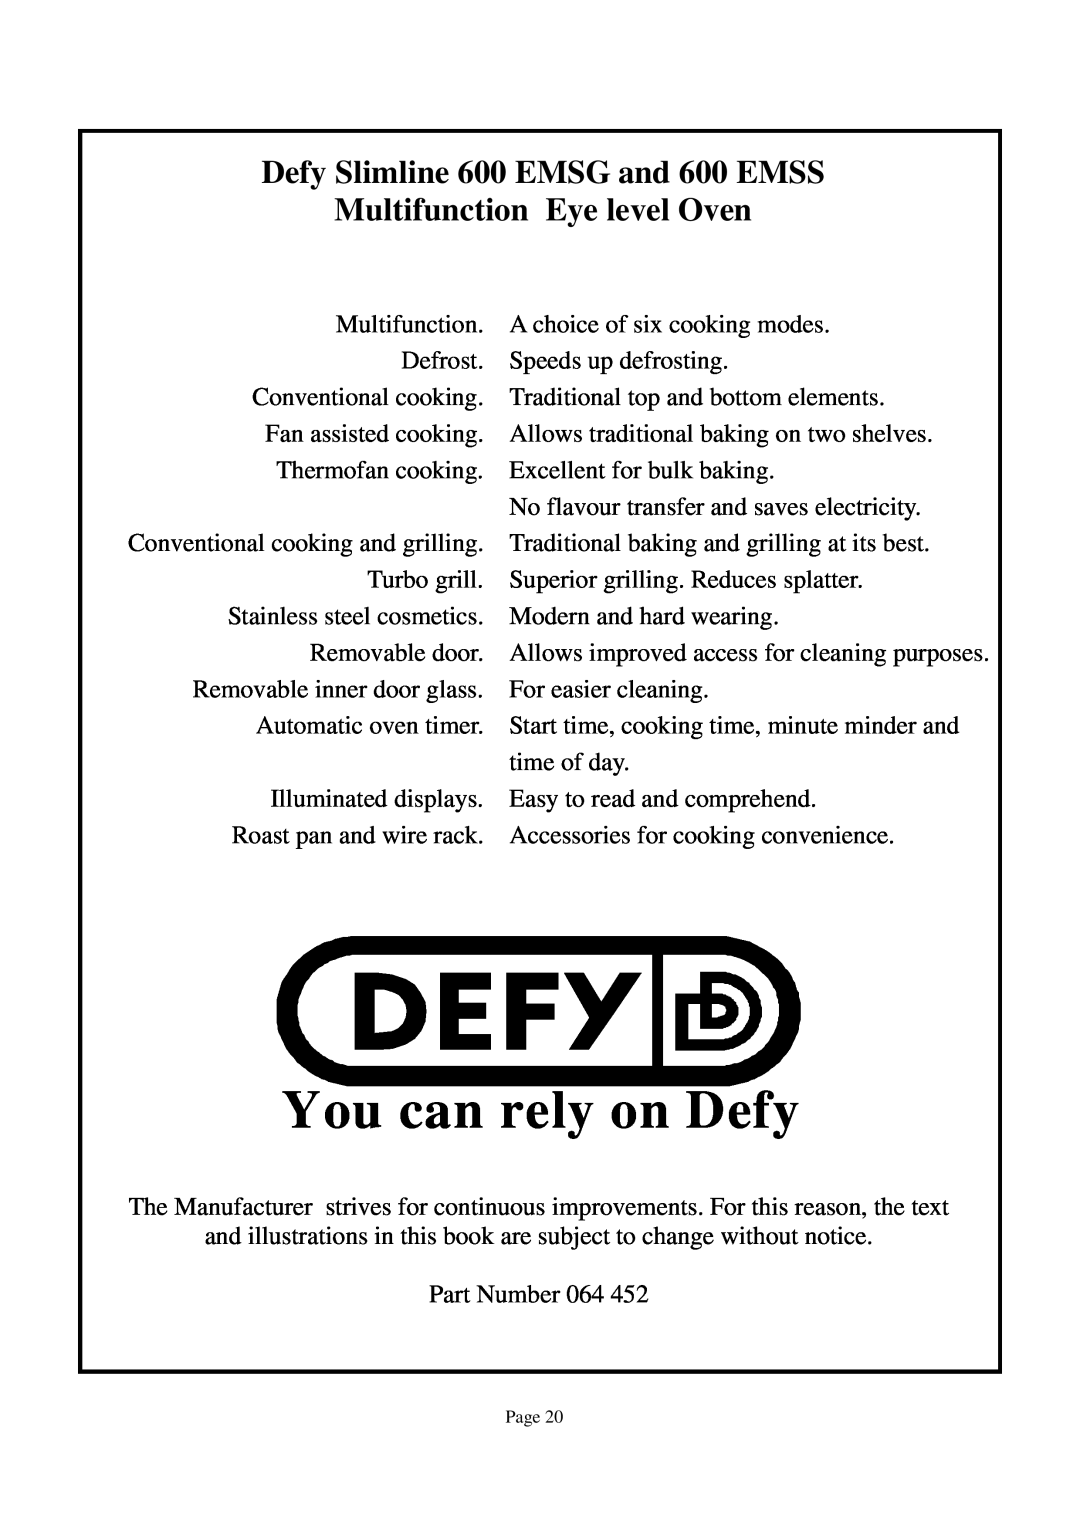 Defy Appliances 600EMSS You can rely on Defy, Defy Slimline 600 EMSG and 600 EMSS, Multifunction Eye level Oven 